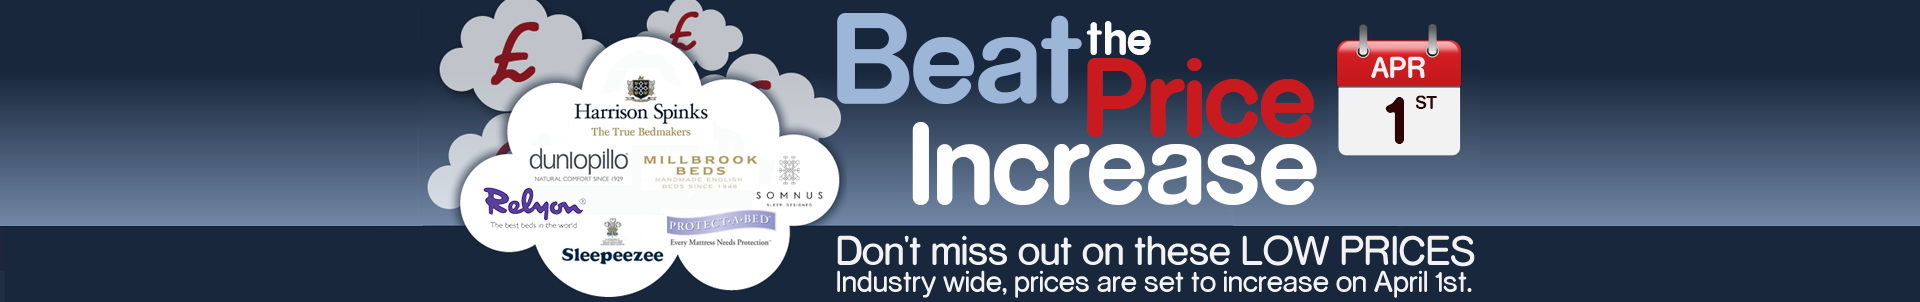 Beat the Price Increase